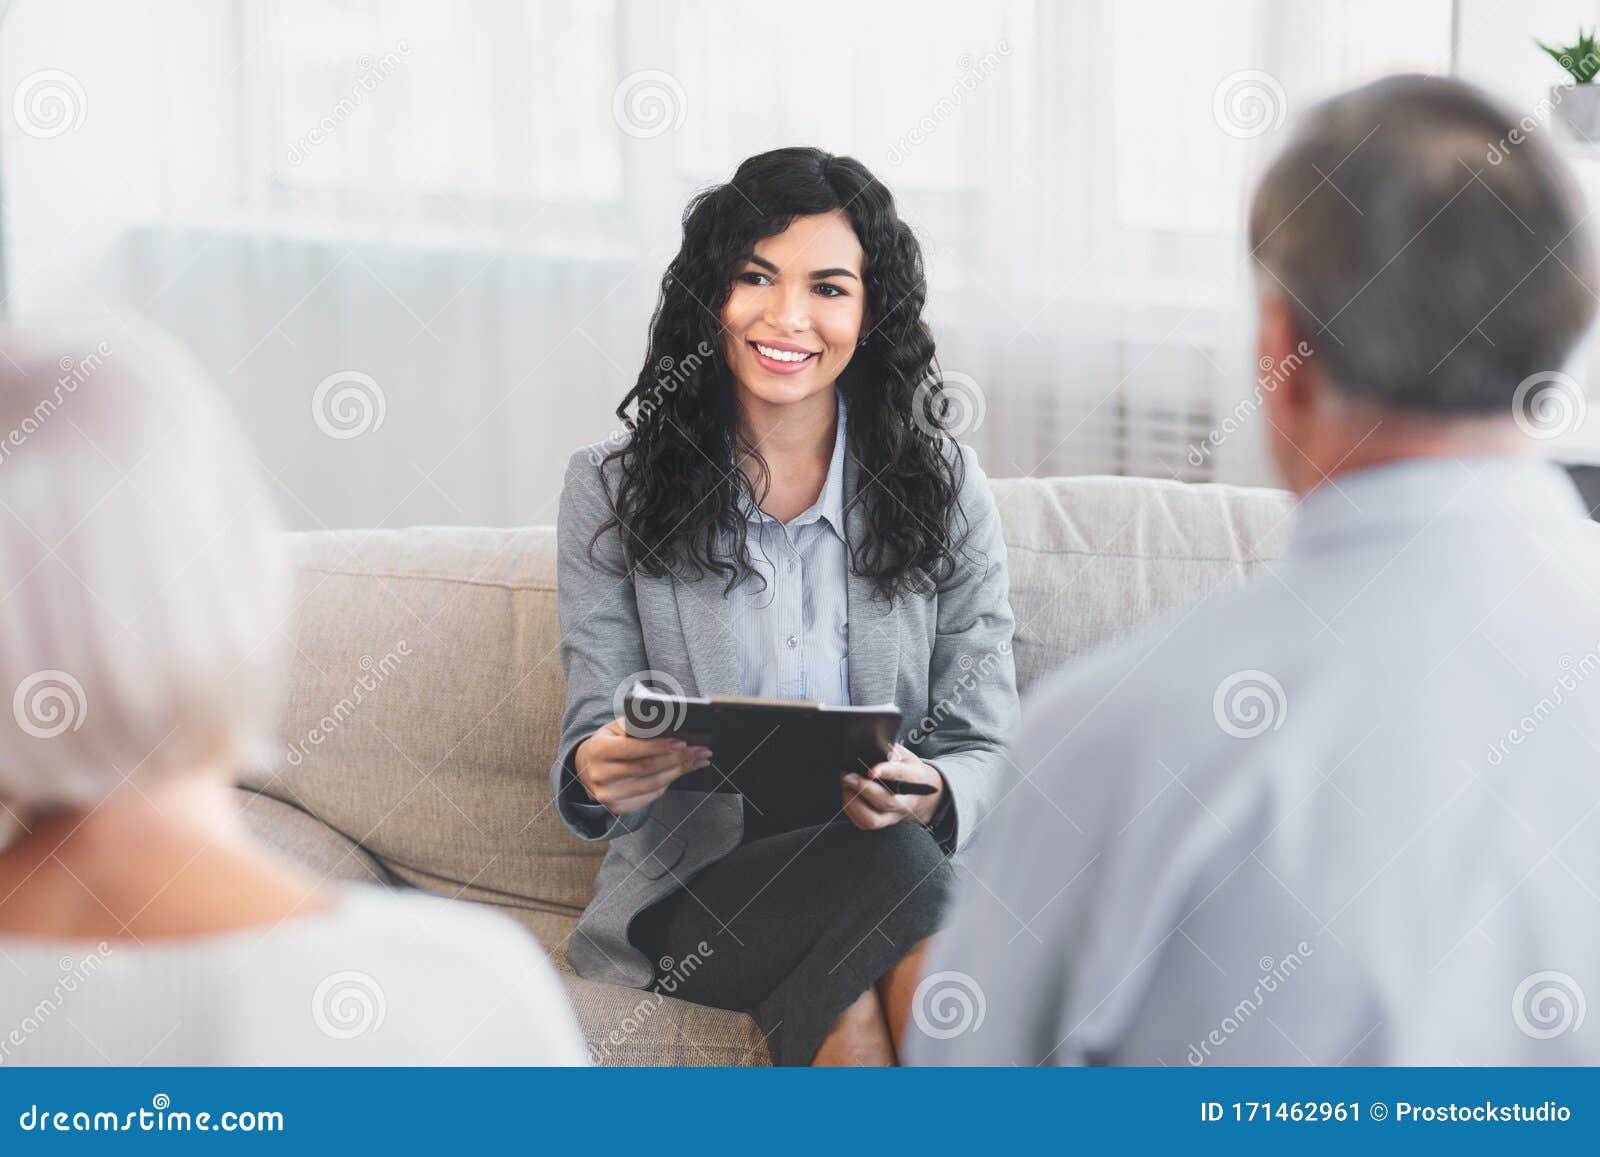 Senior Couple Talking To Financial Advisor At Her Office Stock Image